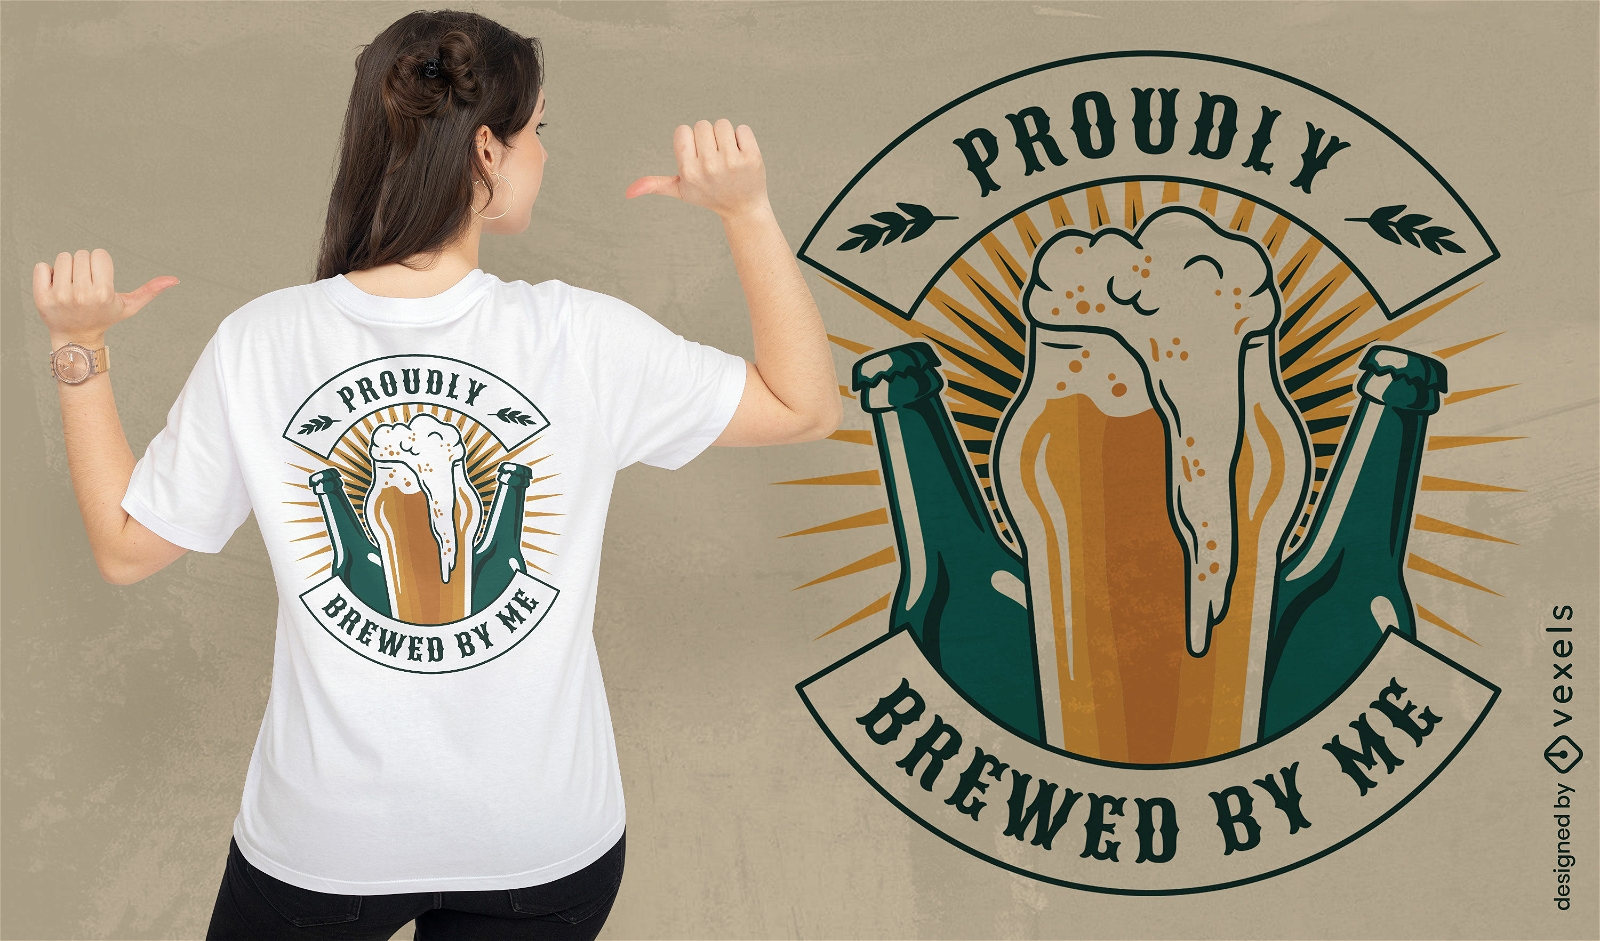 Brewed by me beer t-shirt design